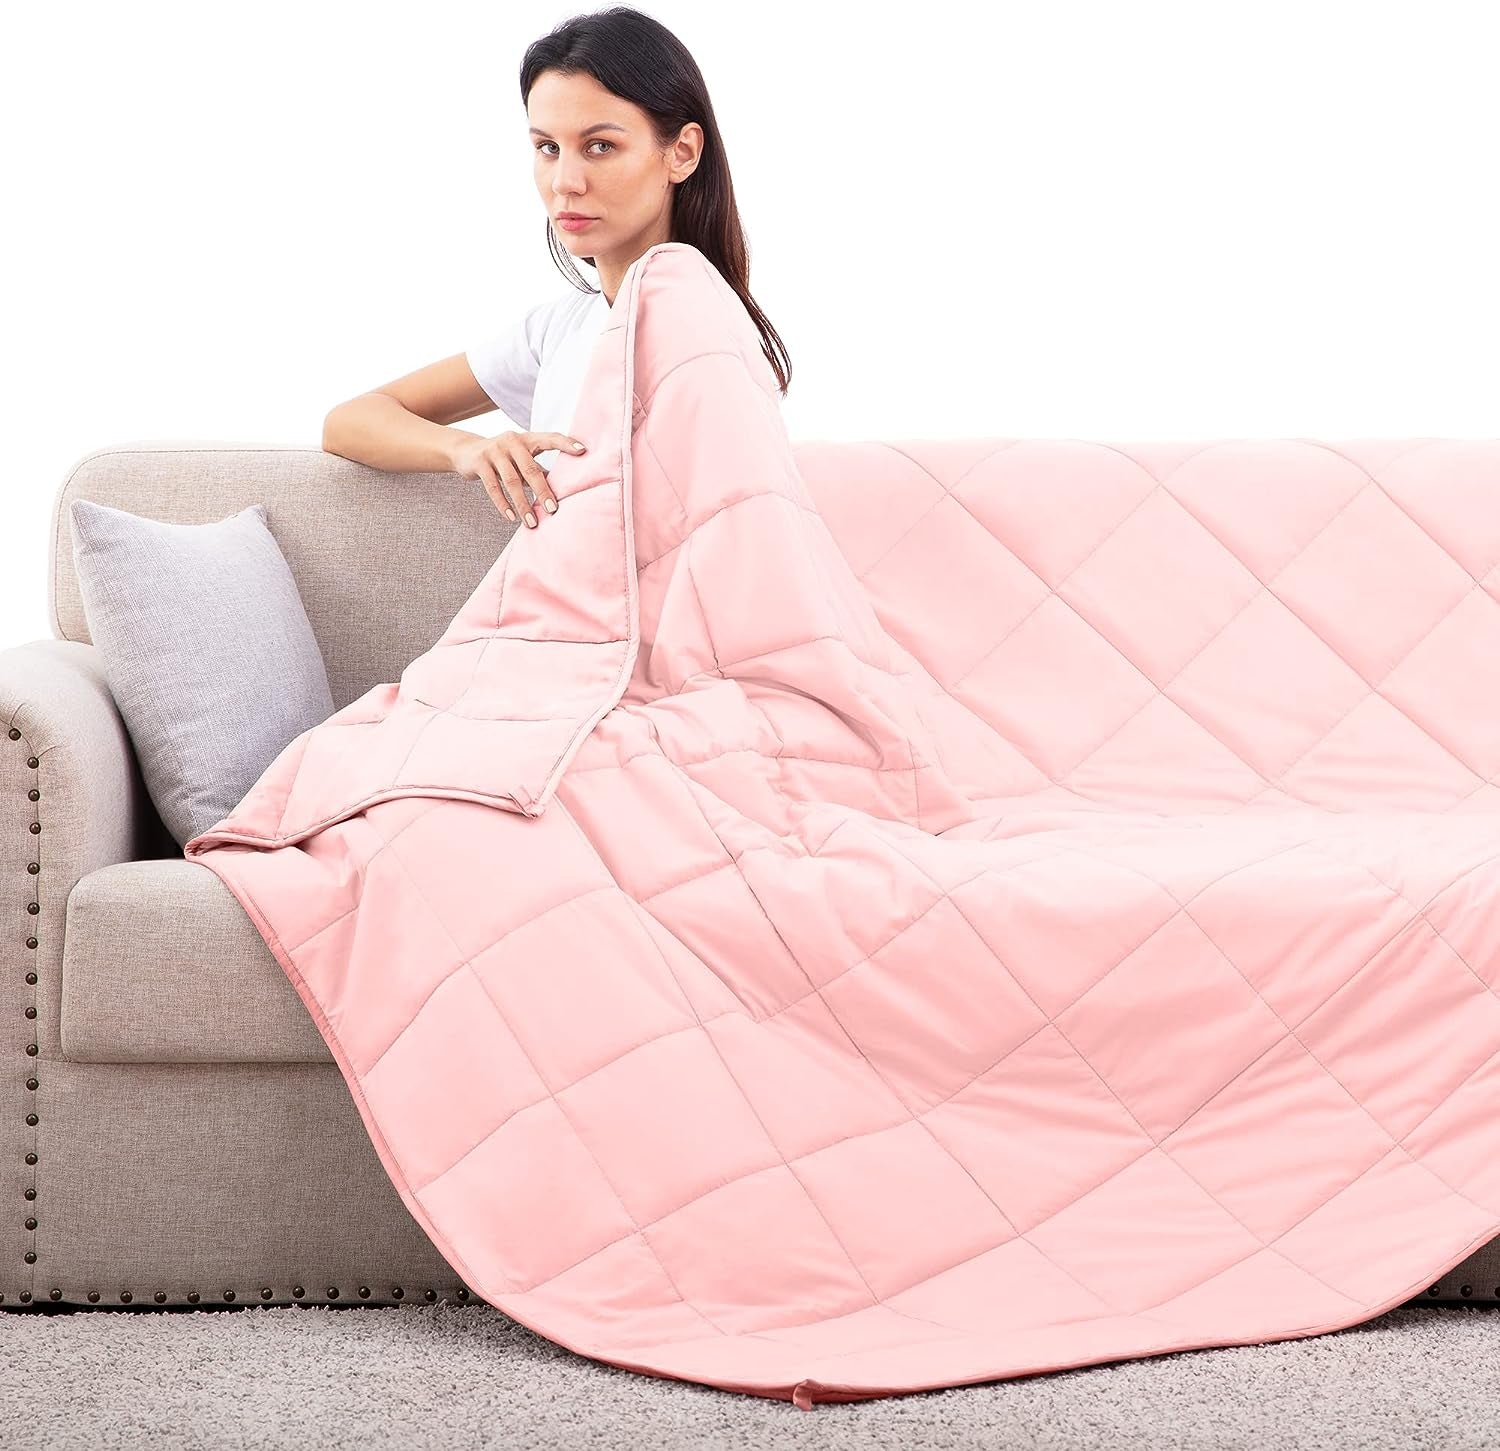 Weighted Blanket Queen Size 15 Pounds 60X80 in Cooling Weighted Blanket for Adults 1800 Brushed Microfiber Heavy Blanket with Premium Glass Beads Pink